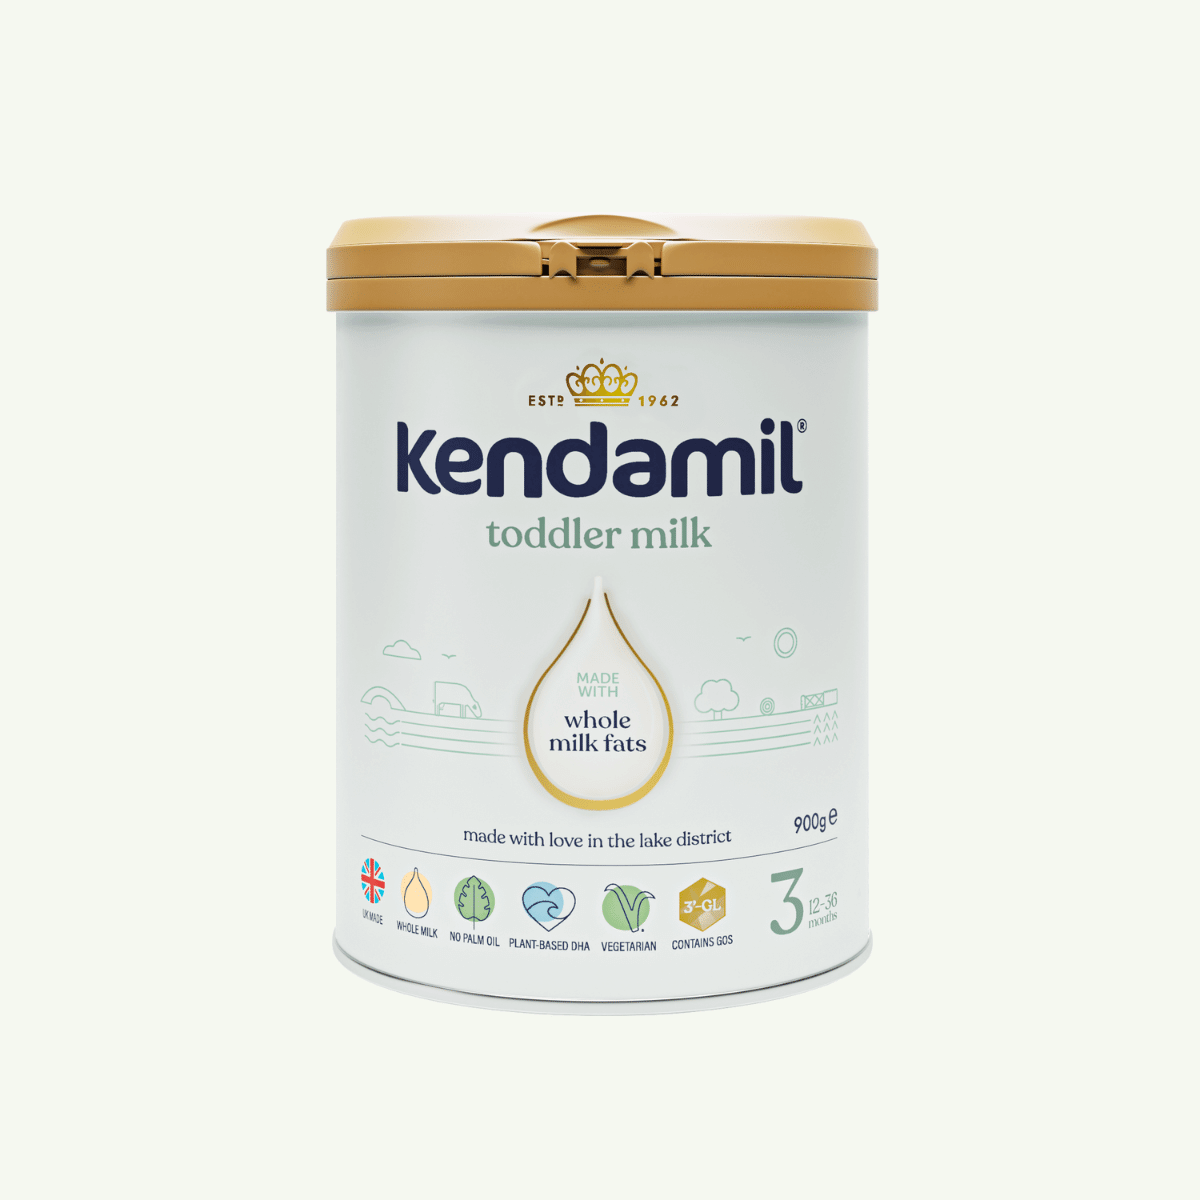 The classic toddler milk specifically for 12 month old babies by Kendamil.